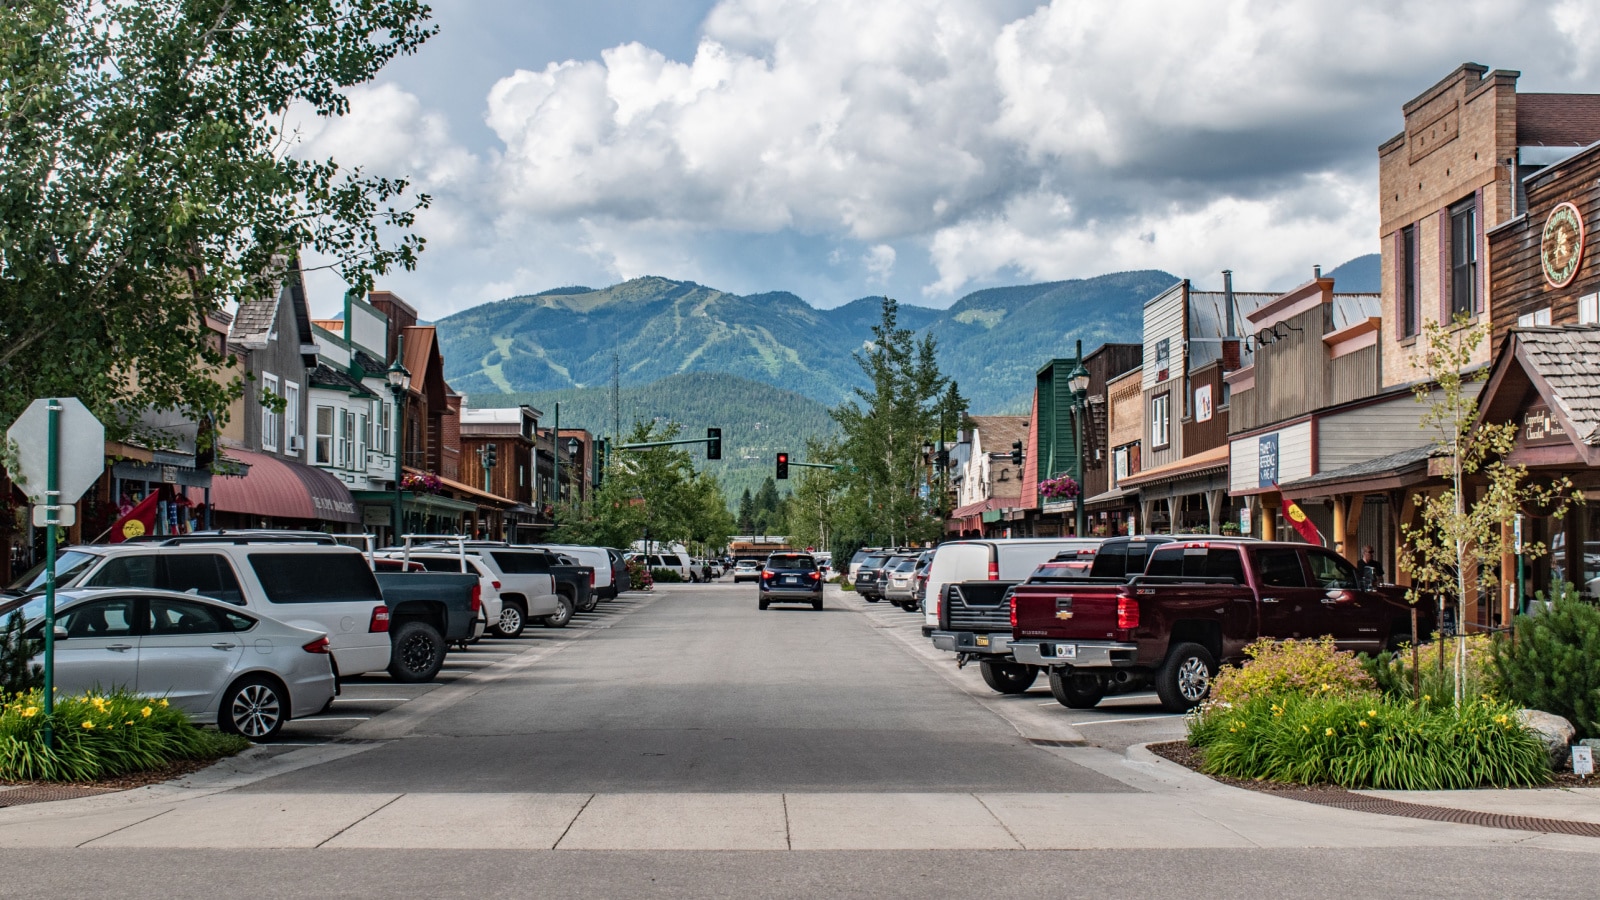 Whitefish, MT,USA - Juli 3 2019 - Mainstreet in Whitefish still has a smalltown feel to it. The town attracts many tourists in summer and winter.